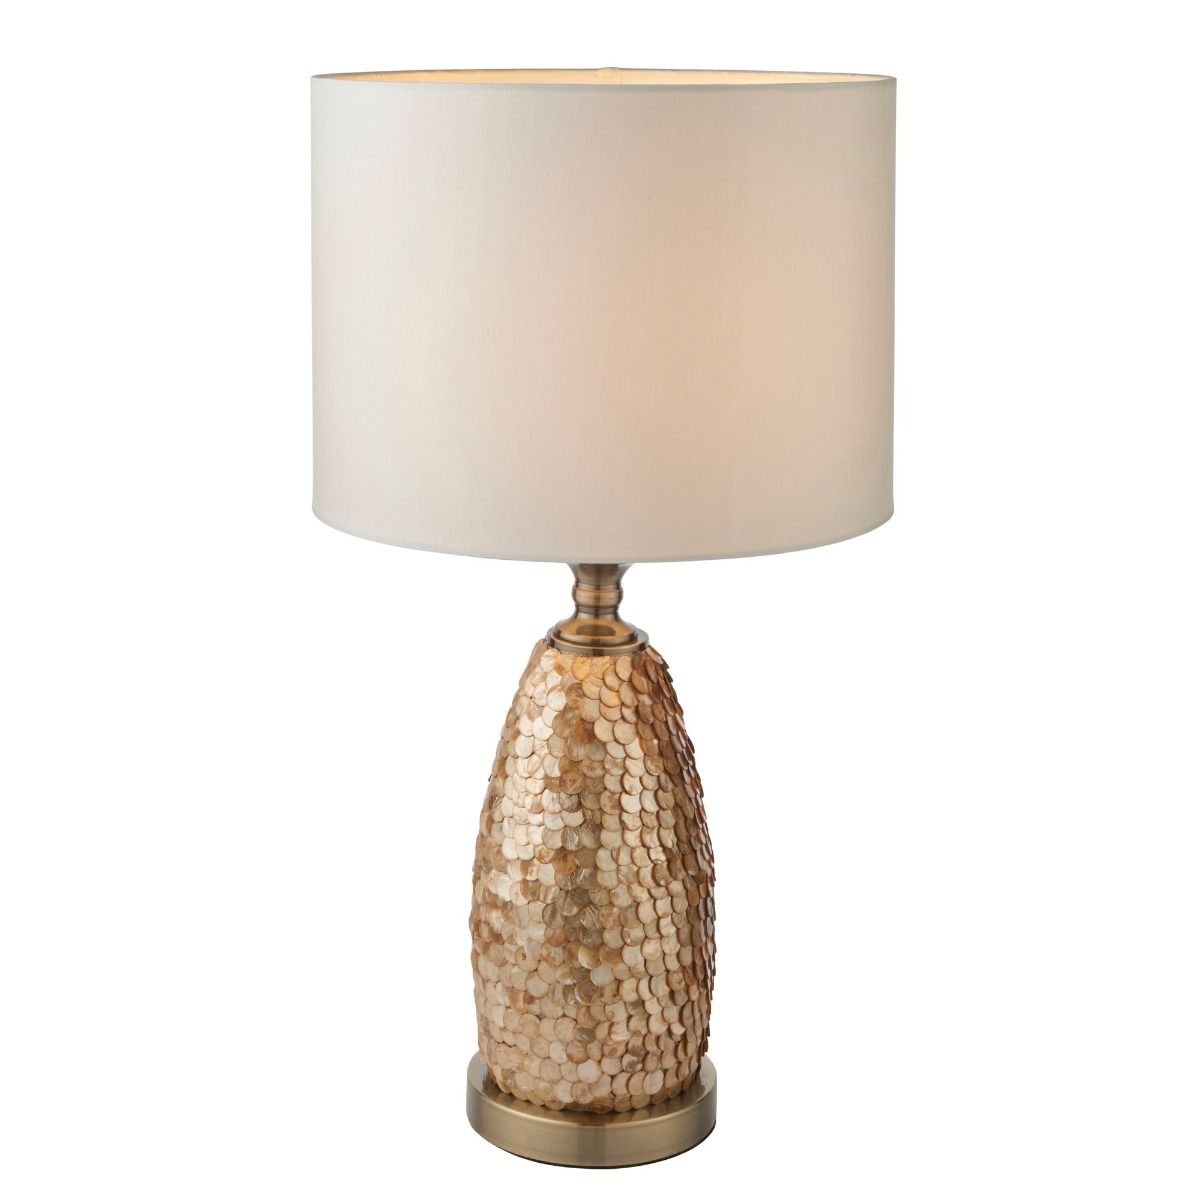 Dahlia Antique Brass & Ivory Table Lamp